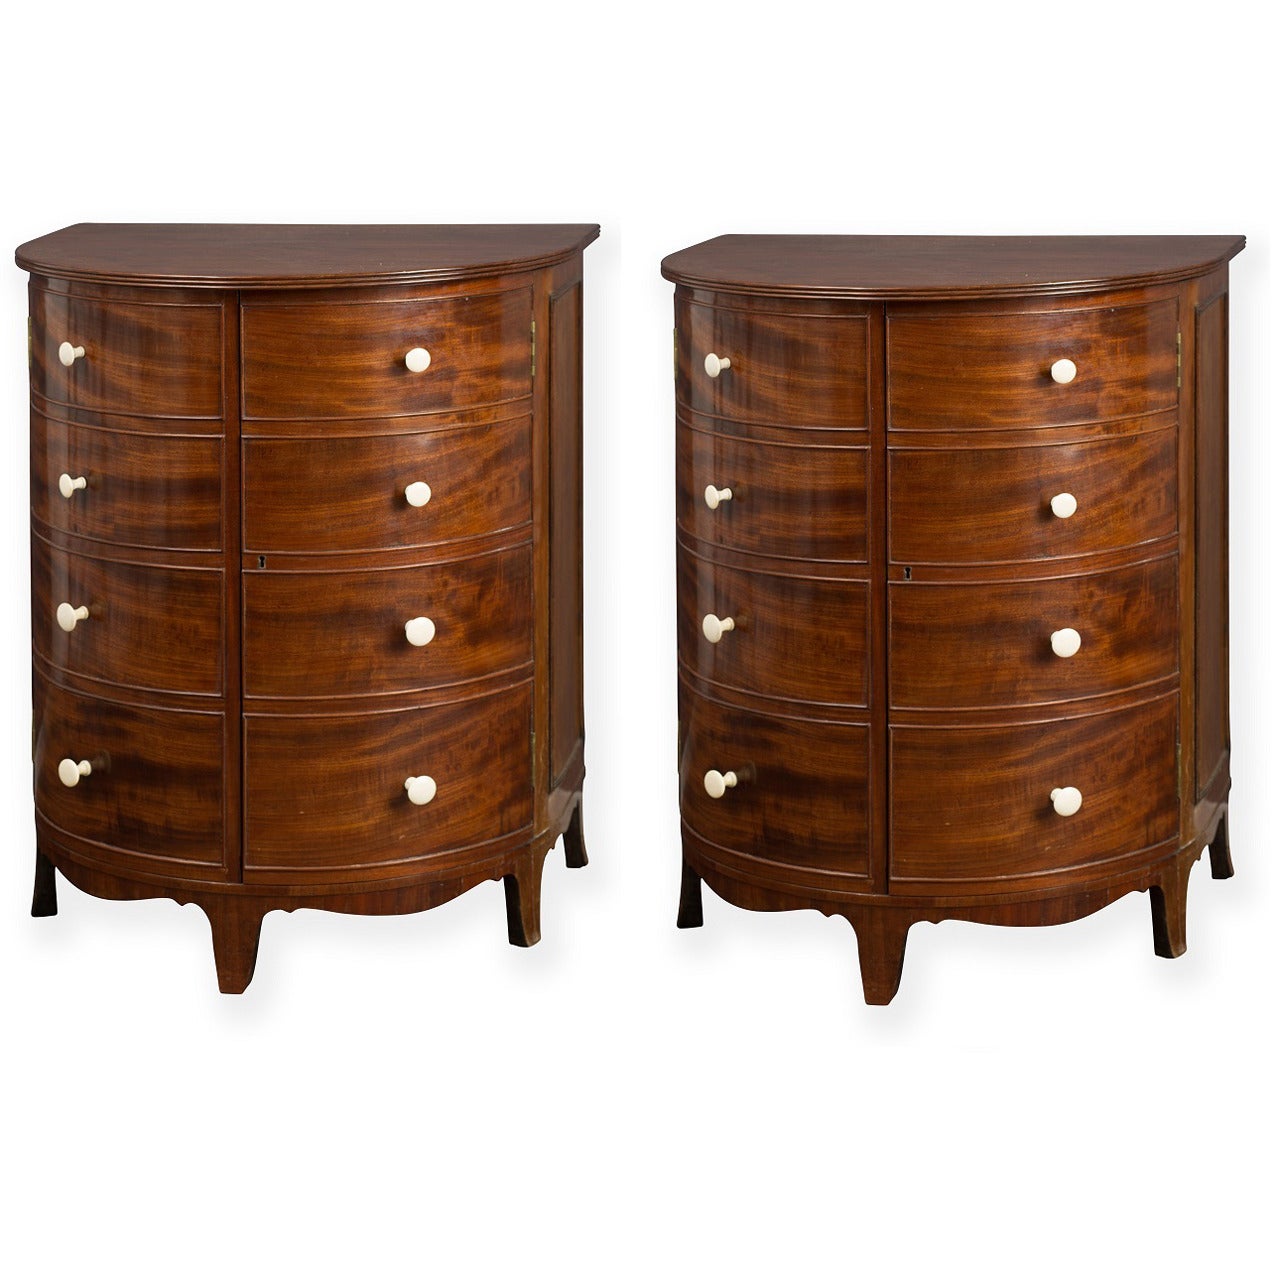 Fine Pair of English Regency Period Mahogany Bedside Cabinets For Sale